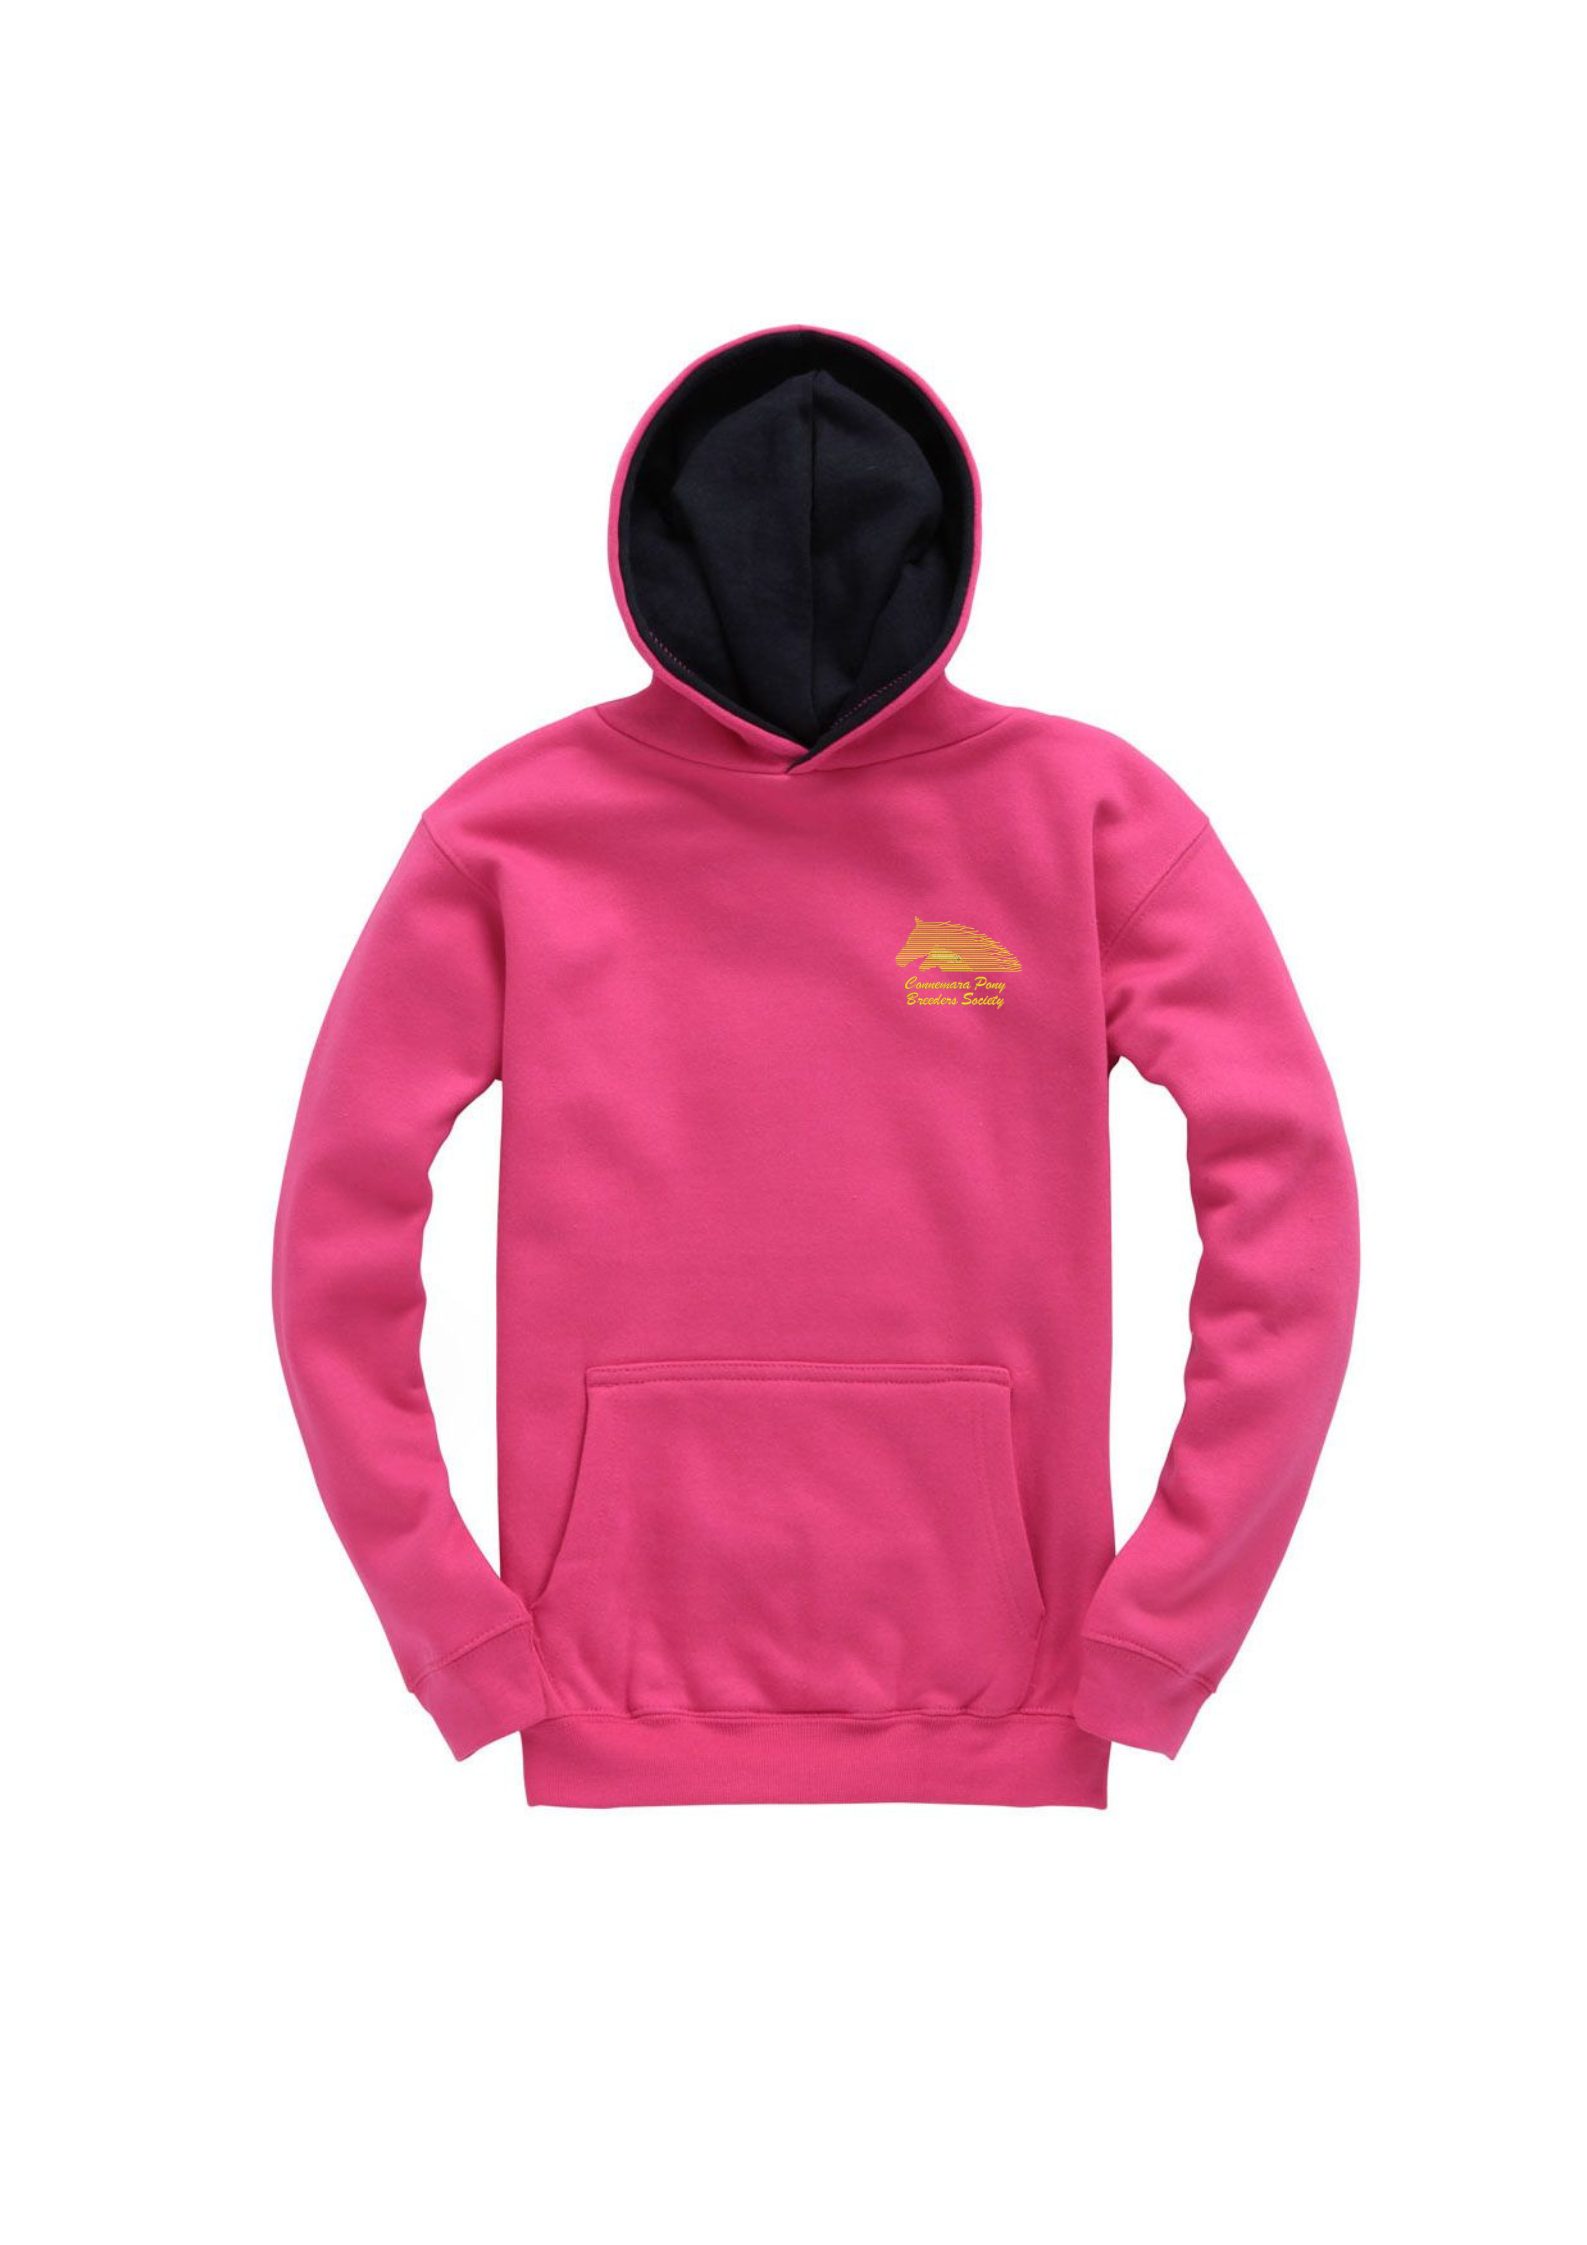 CPBS-Child-Hoody-Pink-CPBSW73K